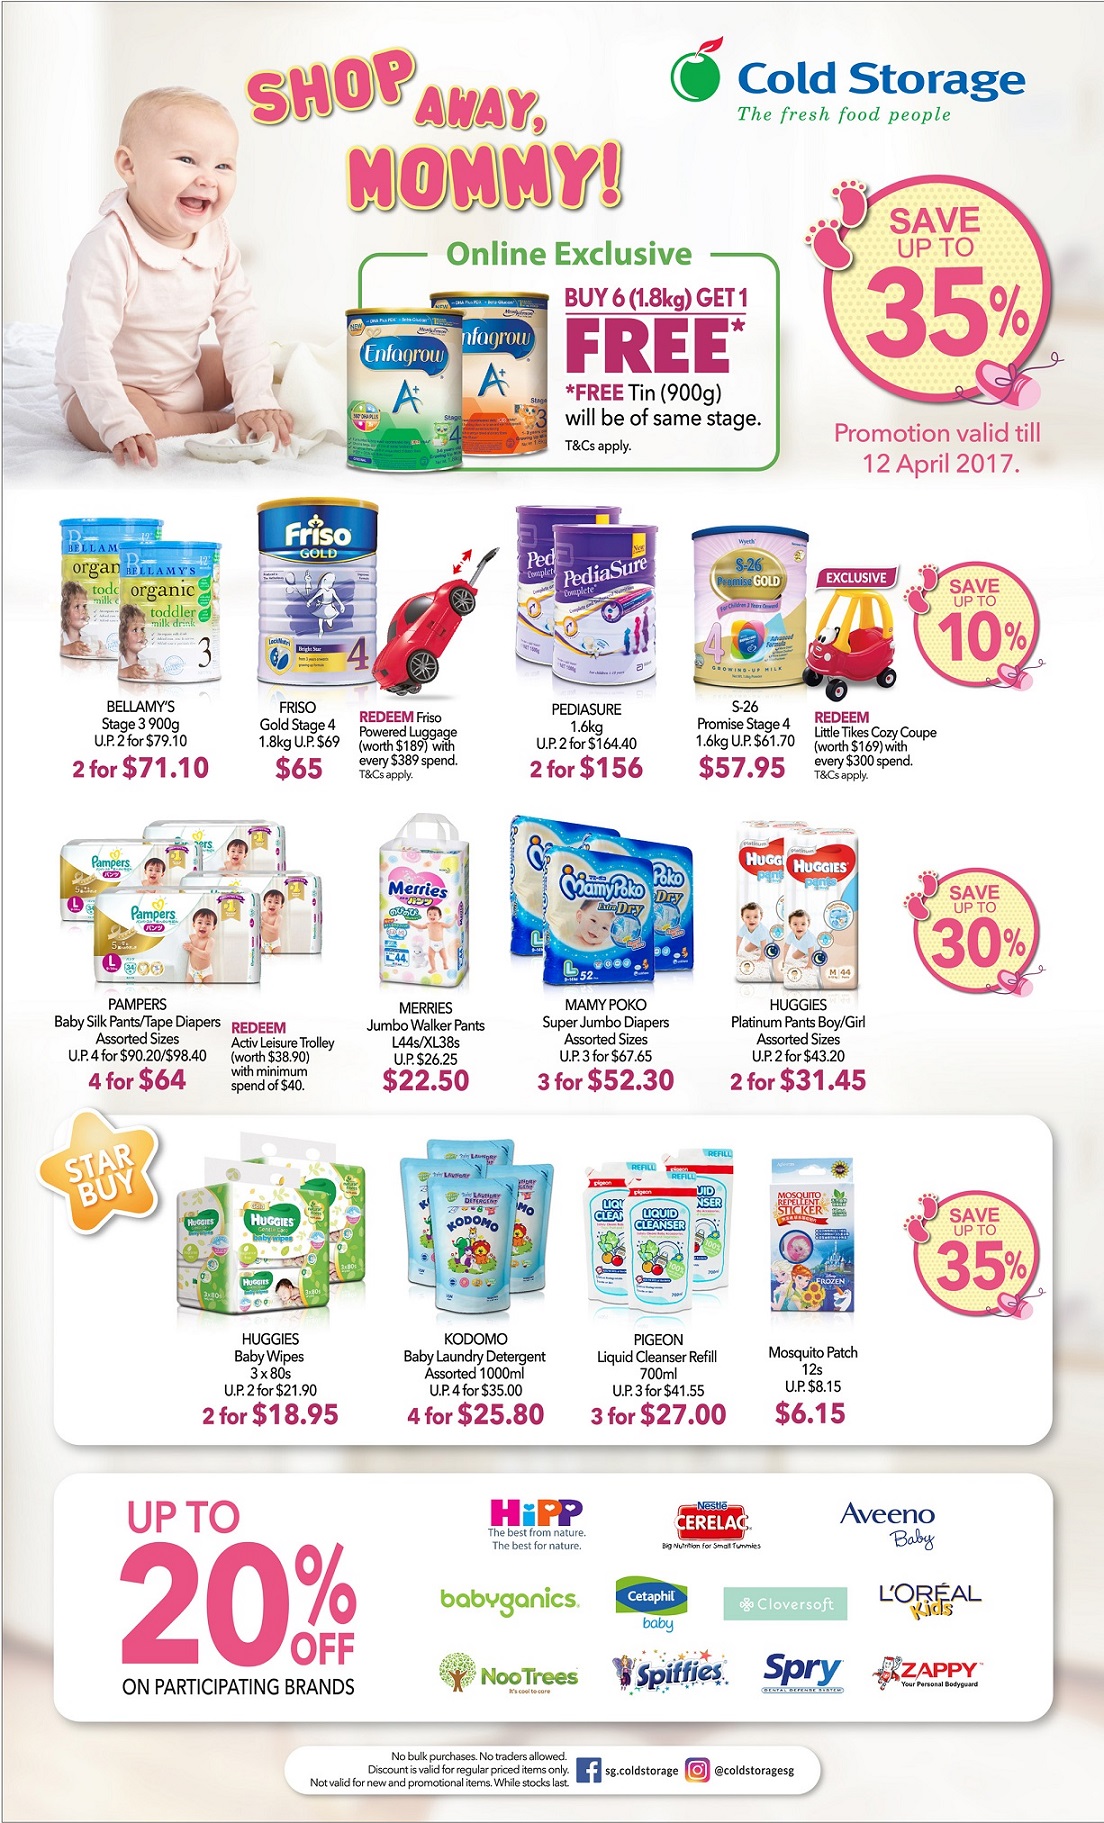 Toys promotion-Baby toys promotion in Singapore,toy car, toy ball, soft toy, building blocks promotion in Singapore